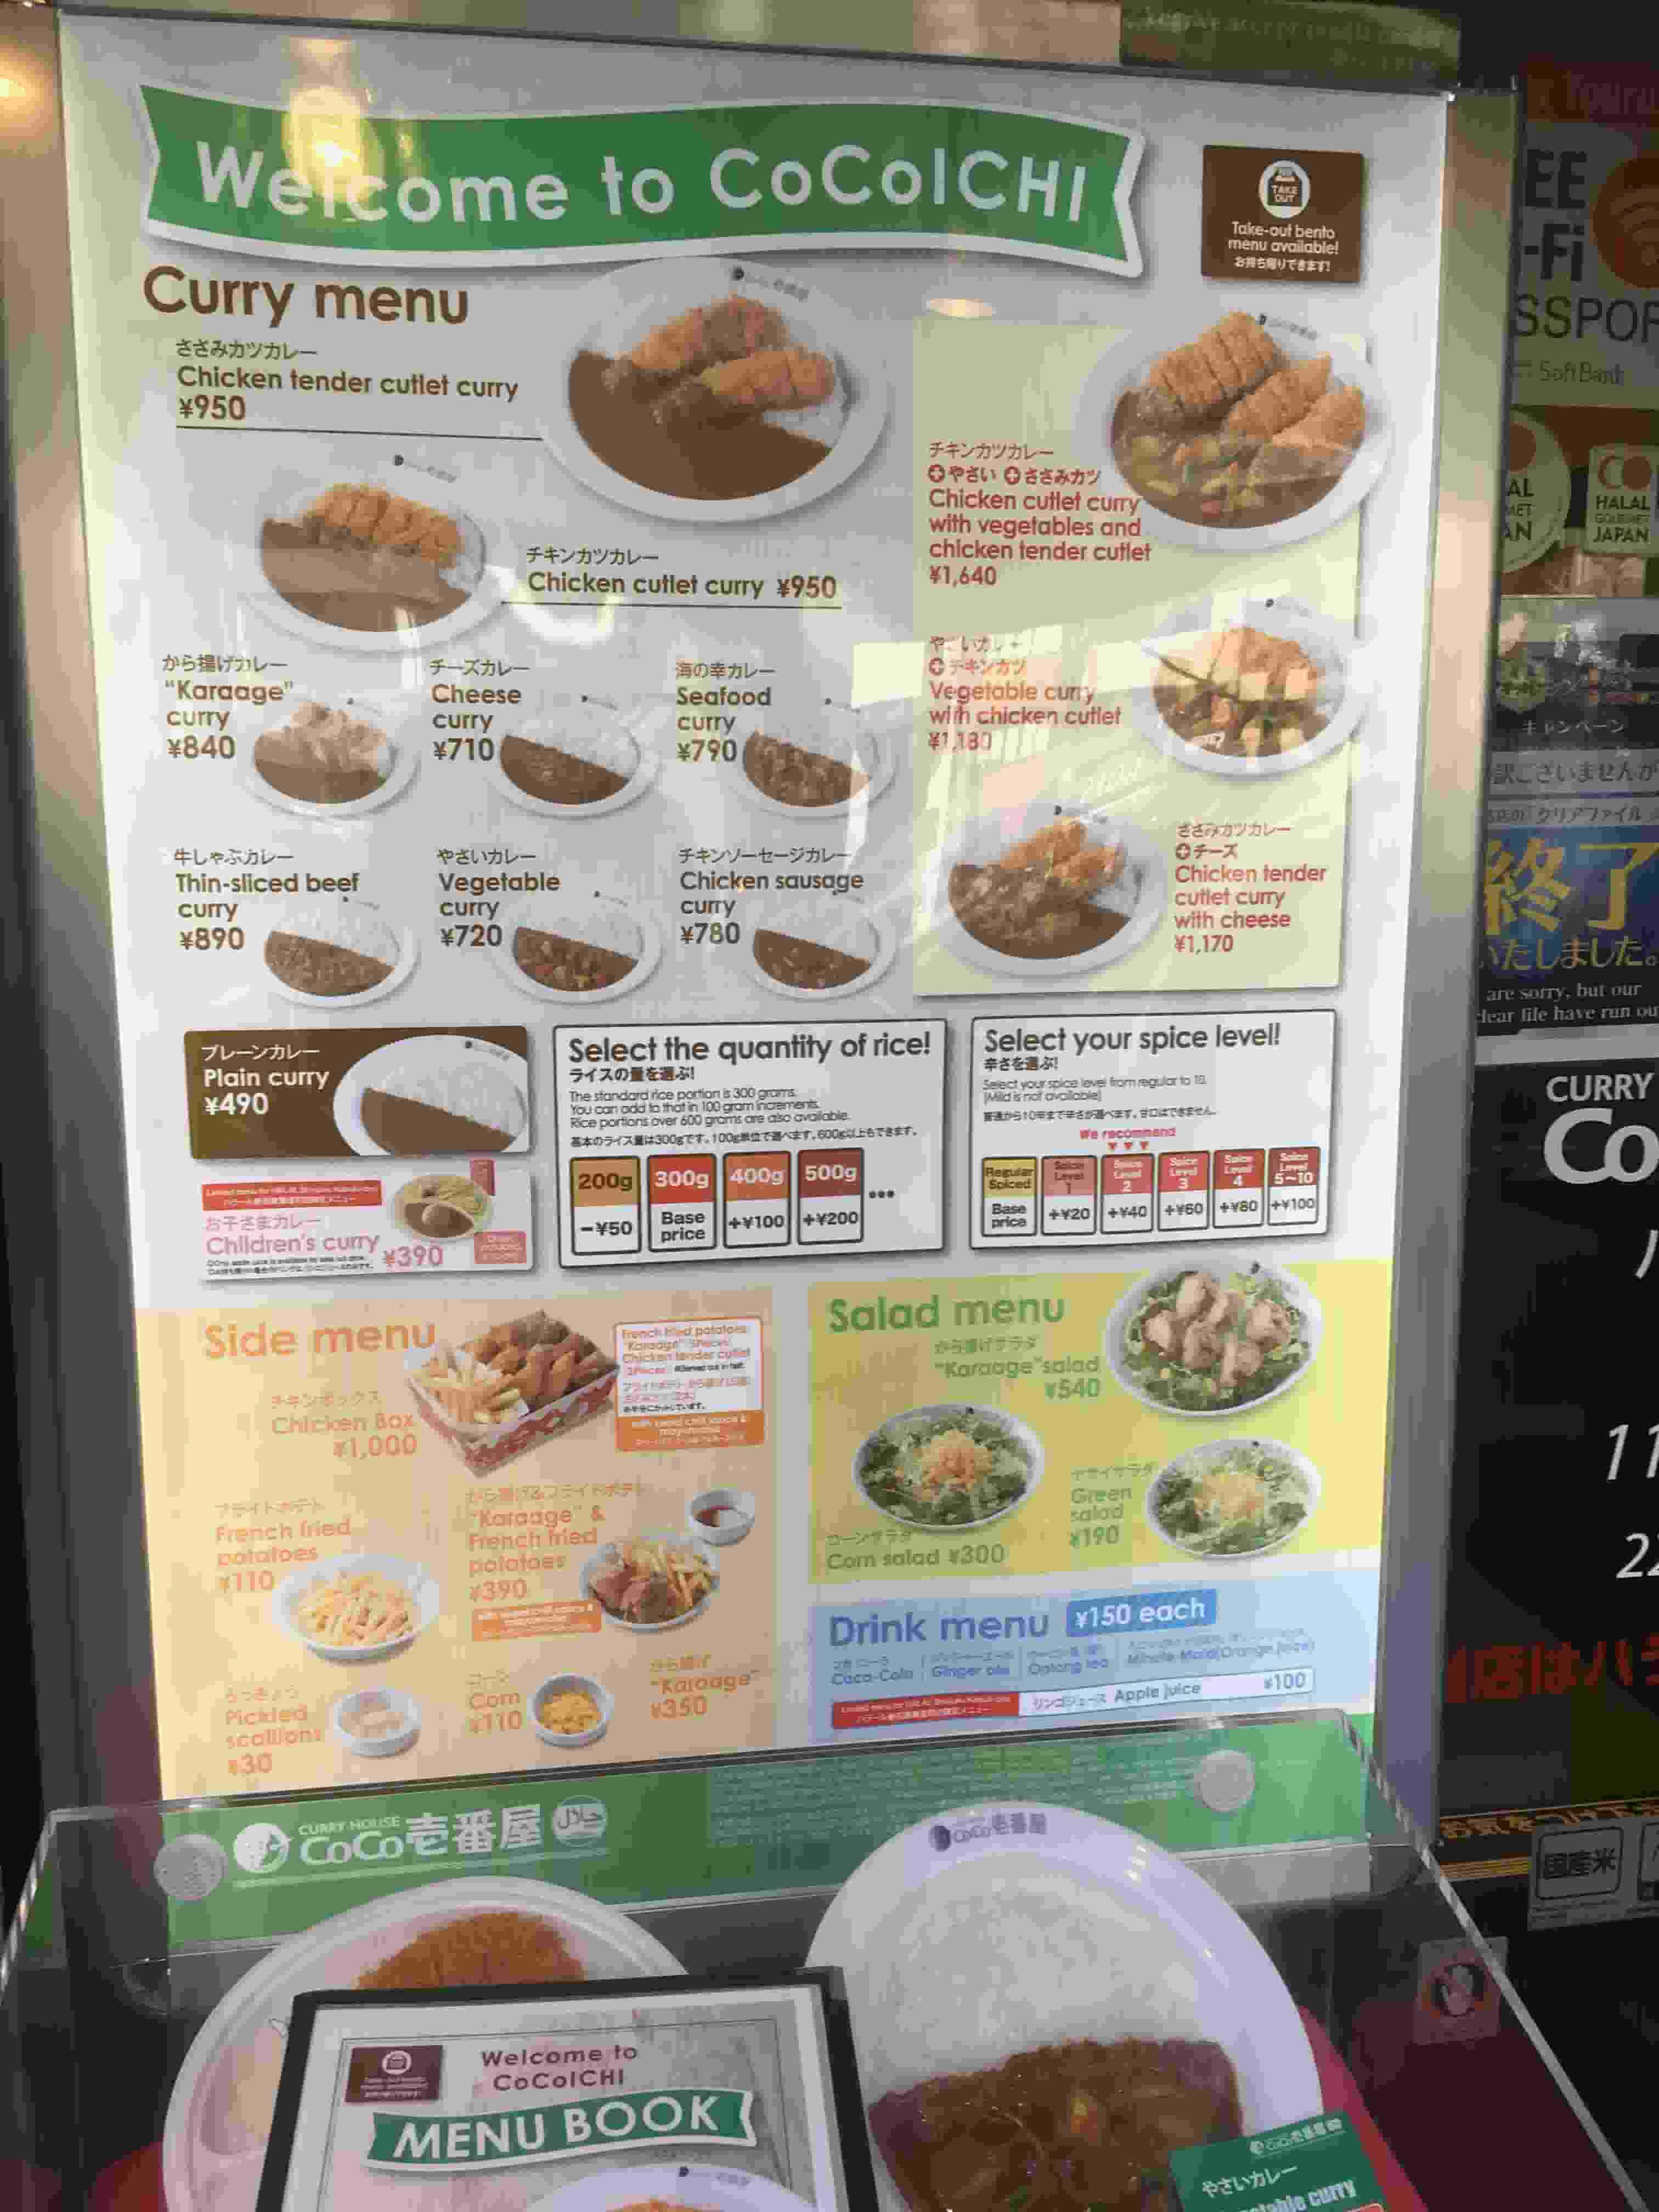 Try Japanese Curry In Foreigner Friendly Curry House Coco Ichibanya Halal Akihabara